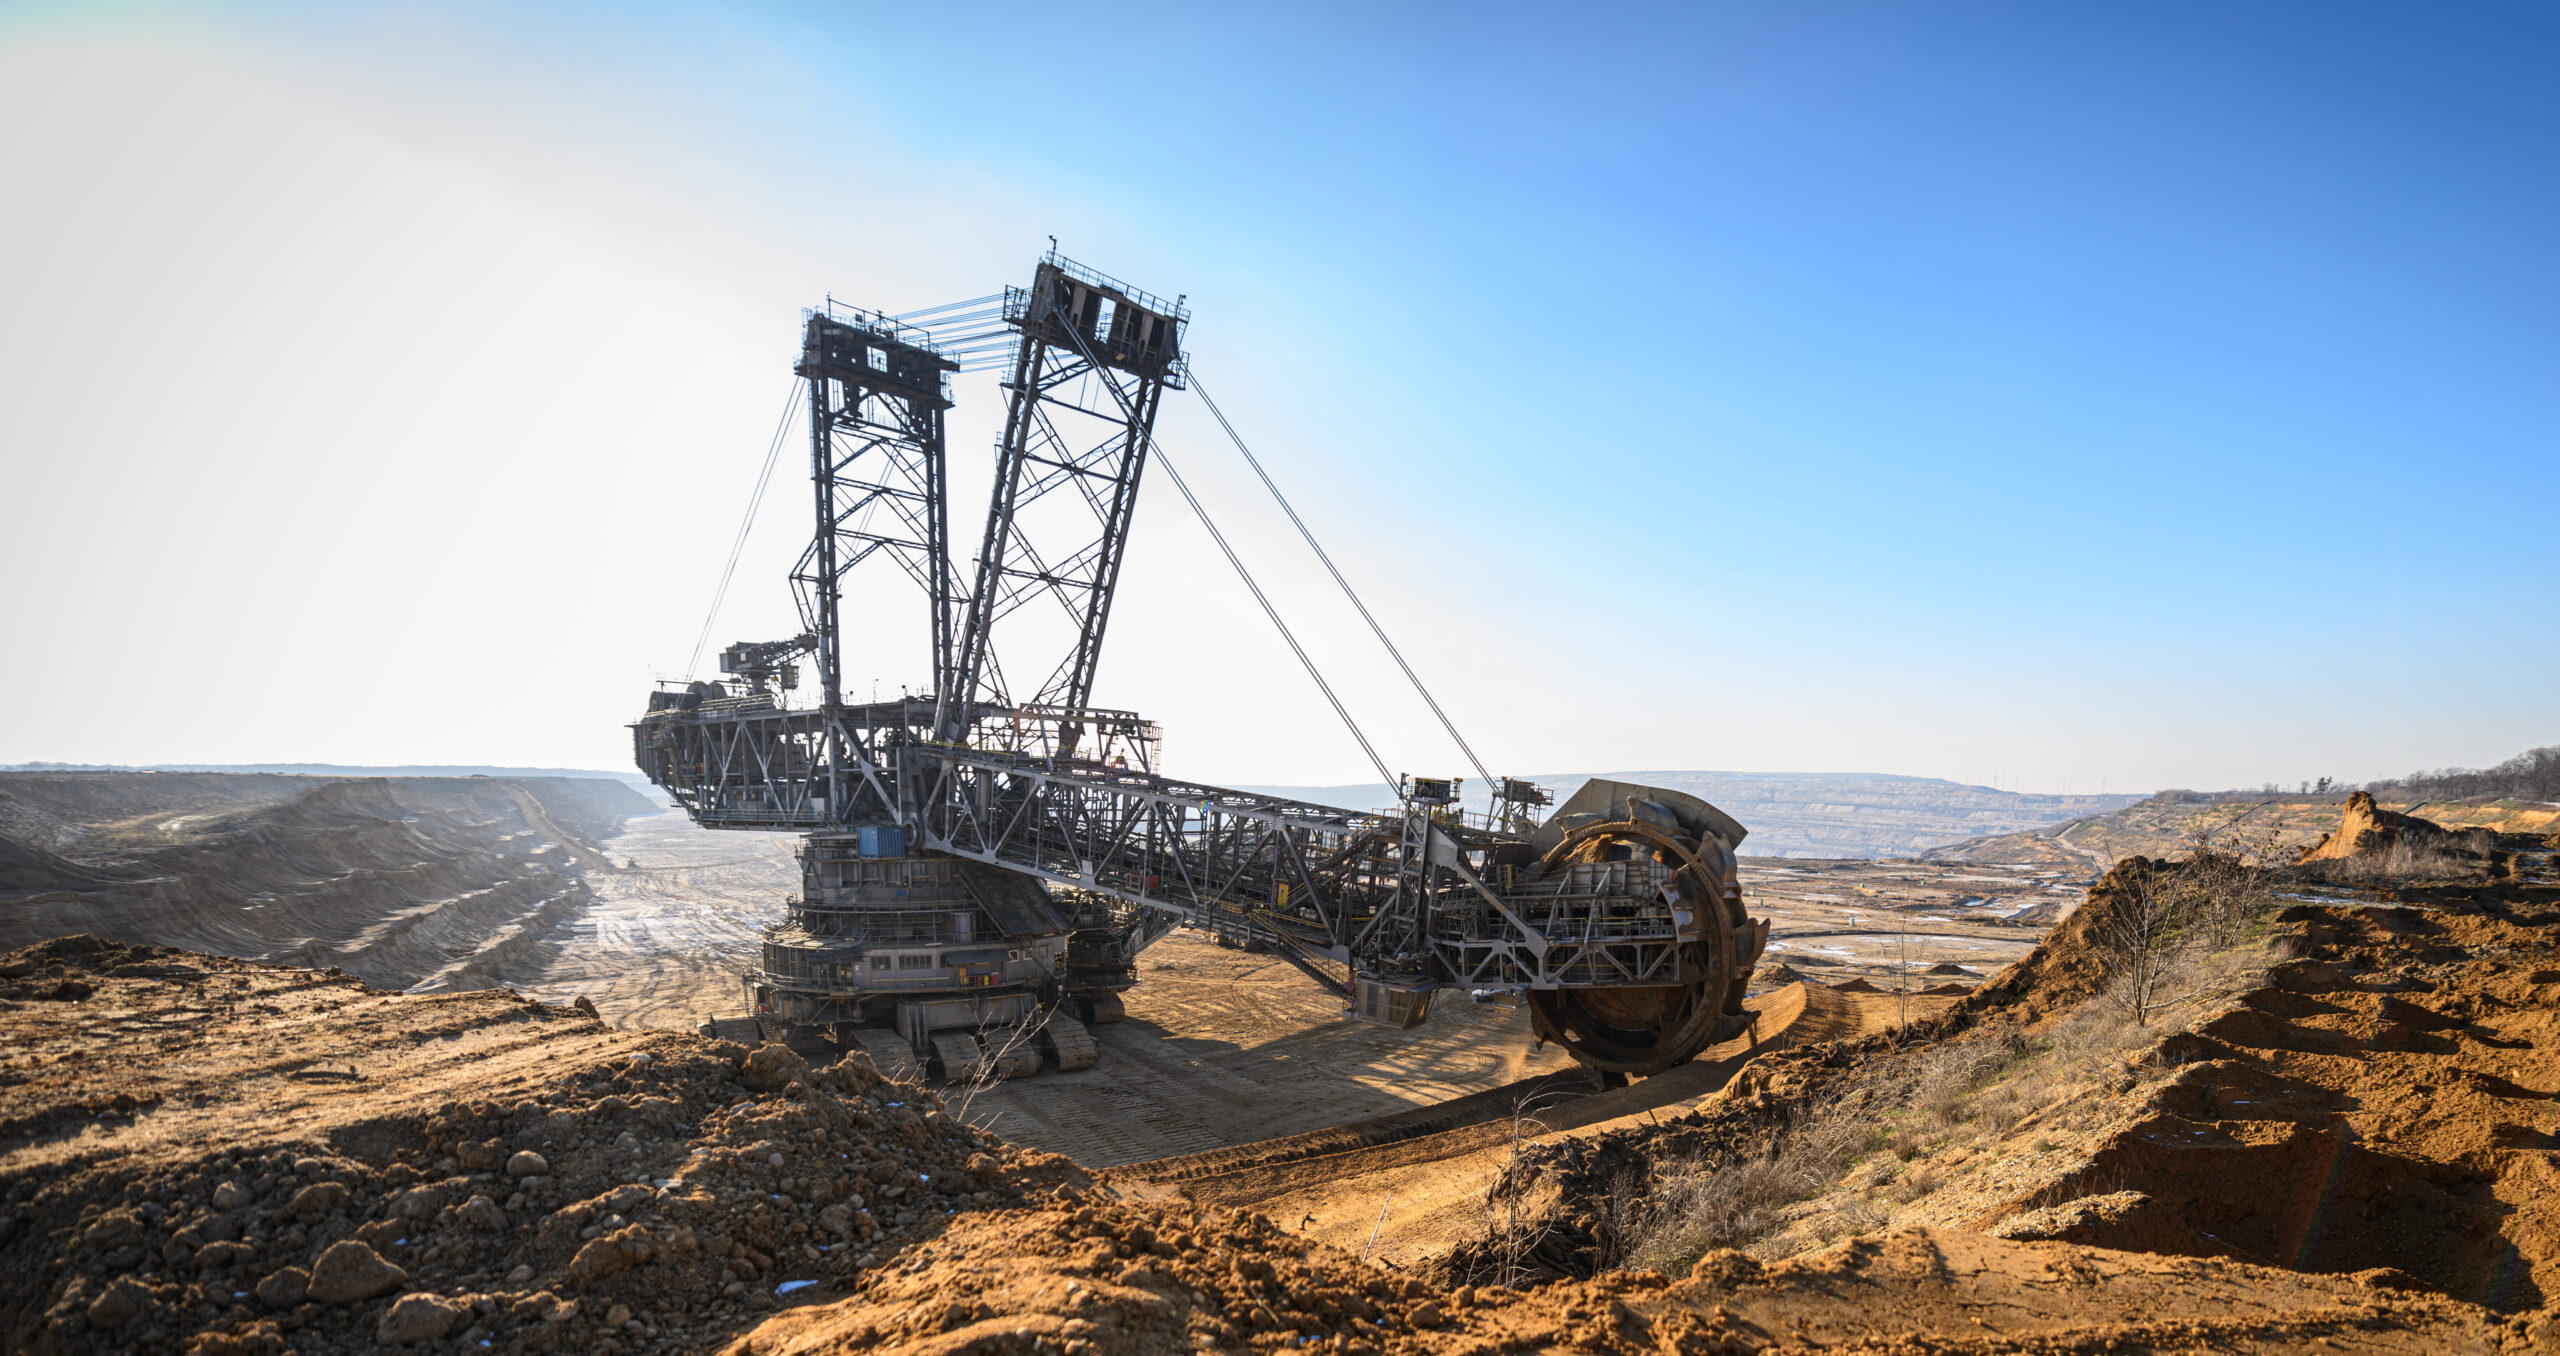 An open cast mine excavating coal. Currently, companies are buying cheaper avoidance credits rather than neutralising their own emissions (Photo: Lukas Schulze/Getty Images) 